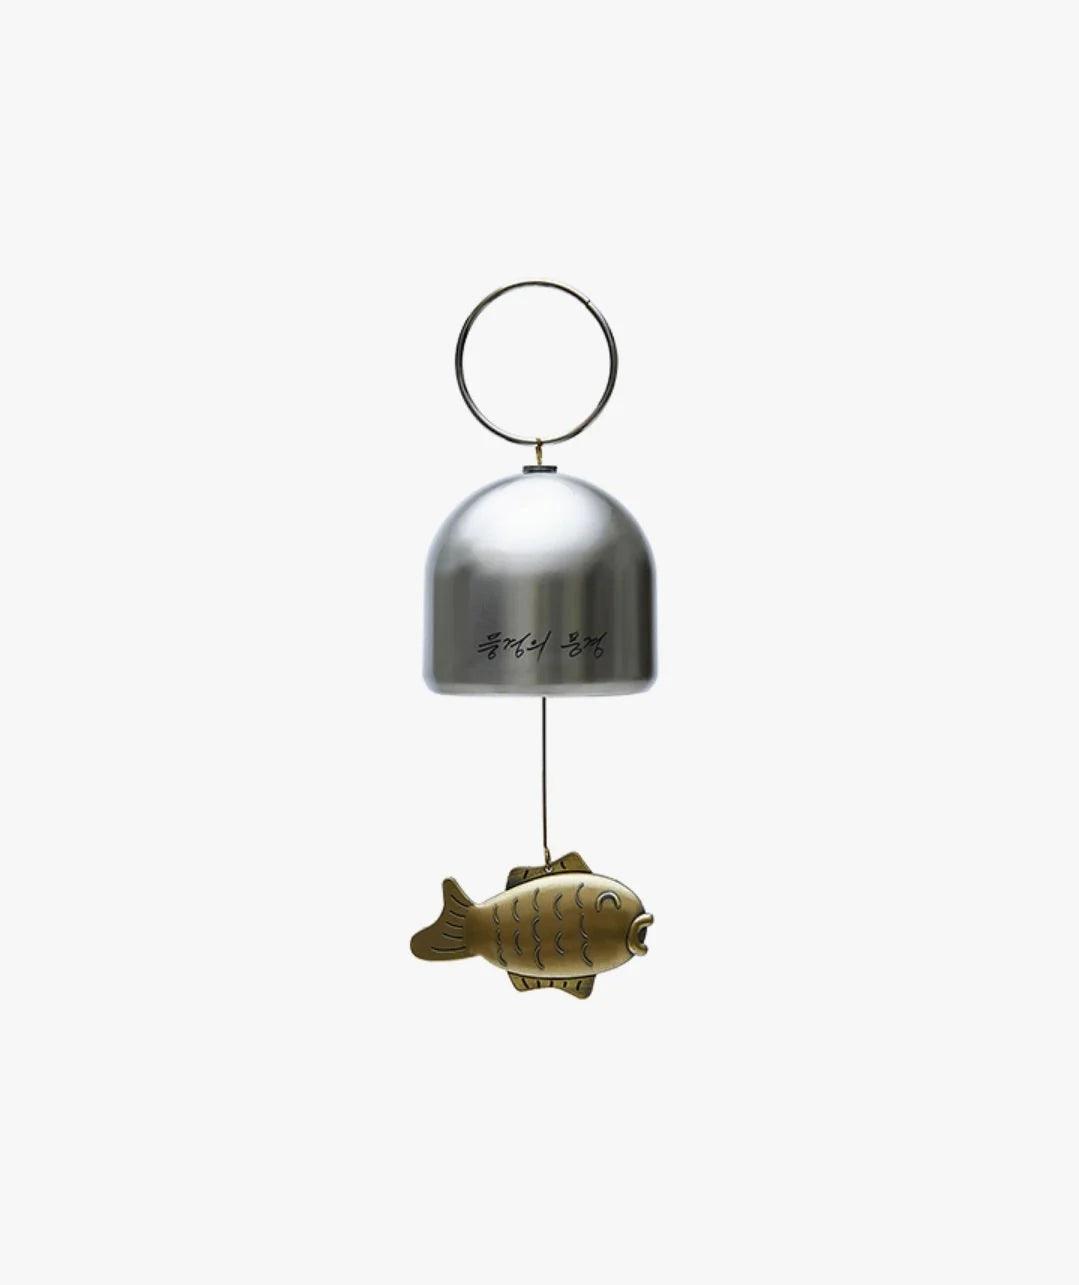 [PRE ORDER] BTS - ARTIST-MADE COLLECTION BY BTS RM - BUNGEO-PPANG WIND CHIME - KAEPJJANG SHOP (캡짱 숍)